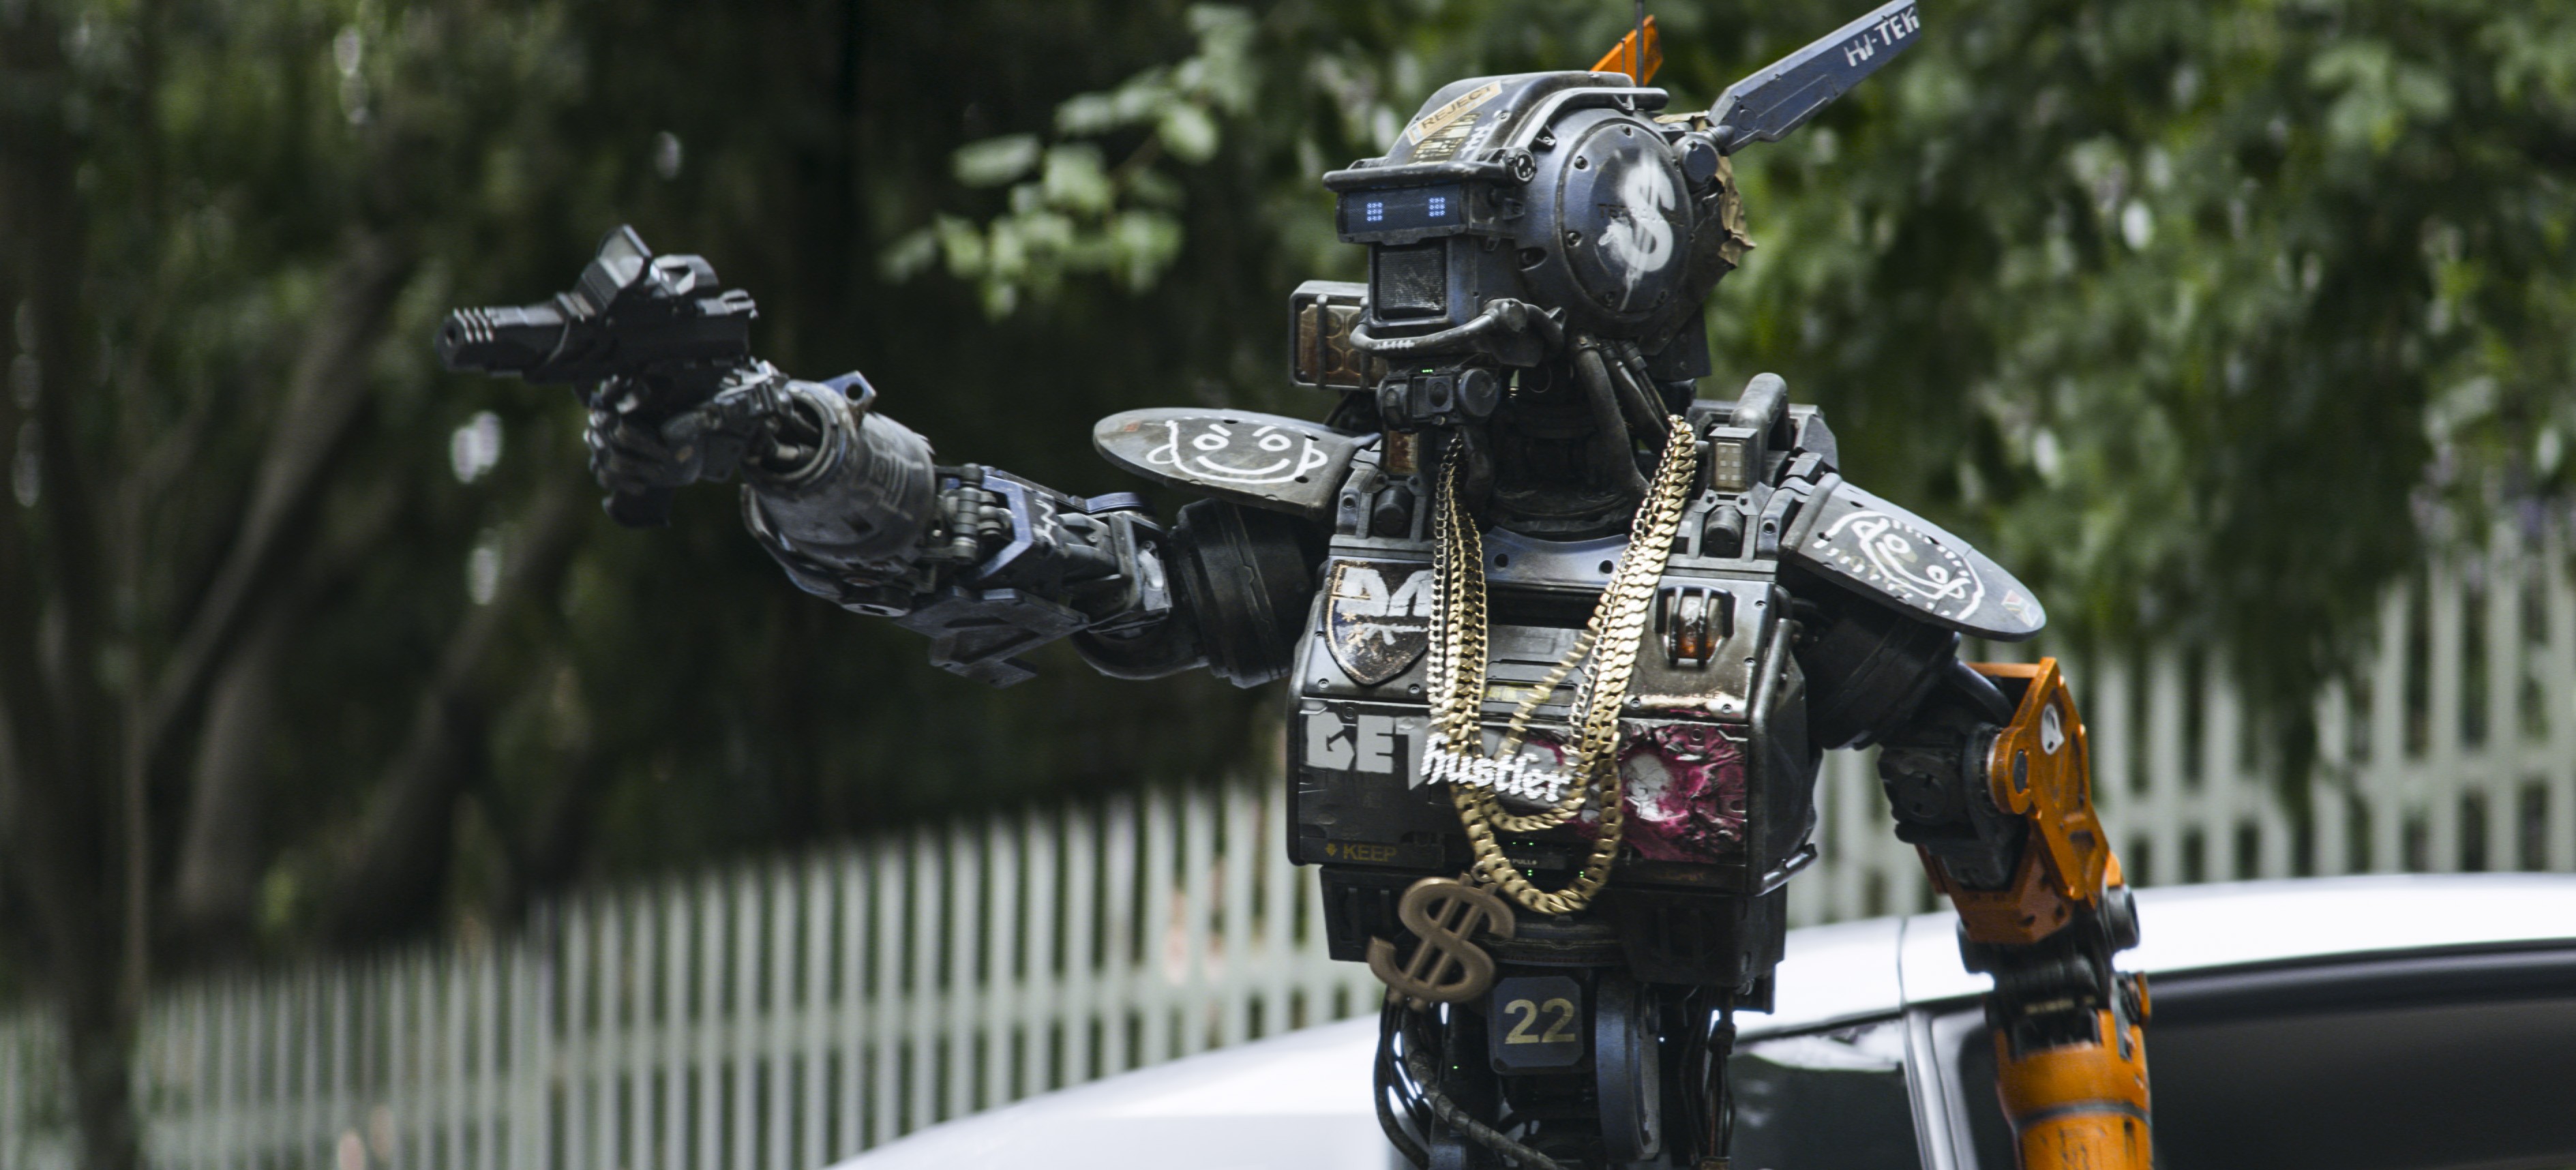 ***SUNDAY CALENDAR  STORY FOR JANUARY 11, 2014. DO NOT USE PRIOR TO PUBLICATION**********Chappie (Sharlto Copley) from Columbia Pictures' action-adventure movie CHAPPIE. (Foto: Columbia Pictures)